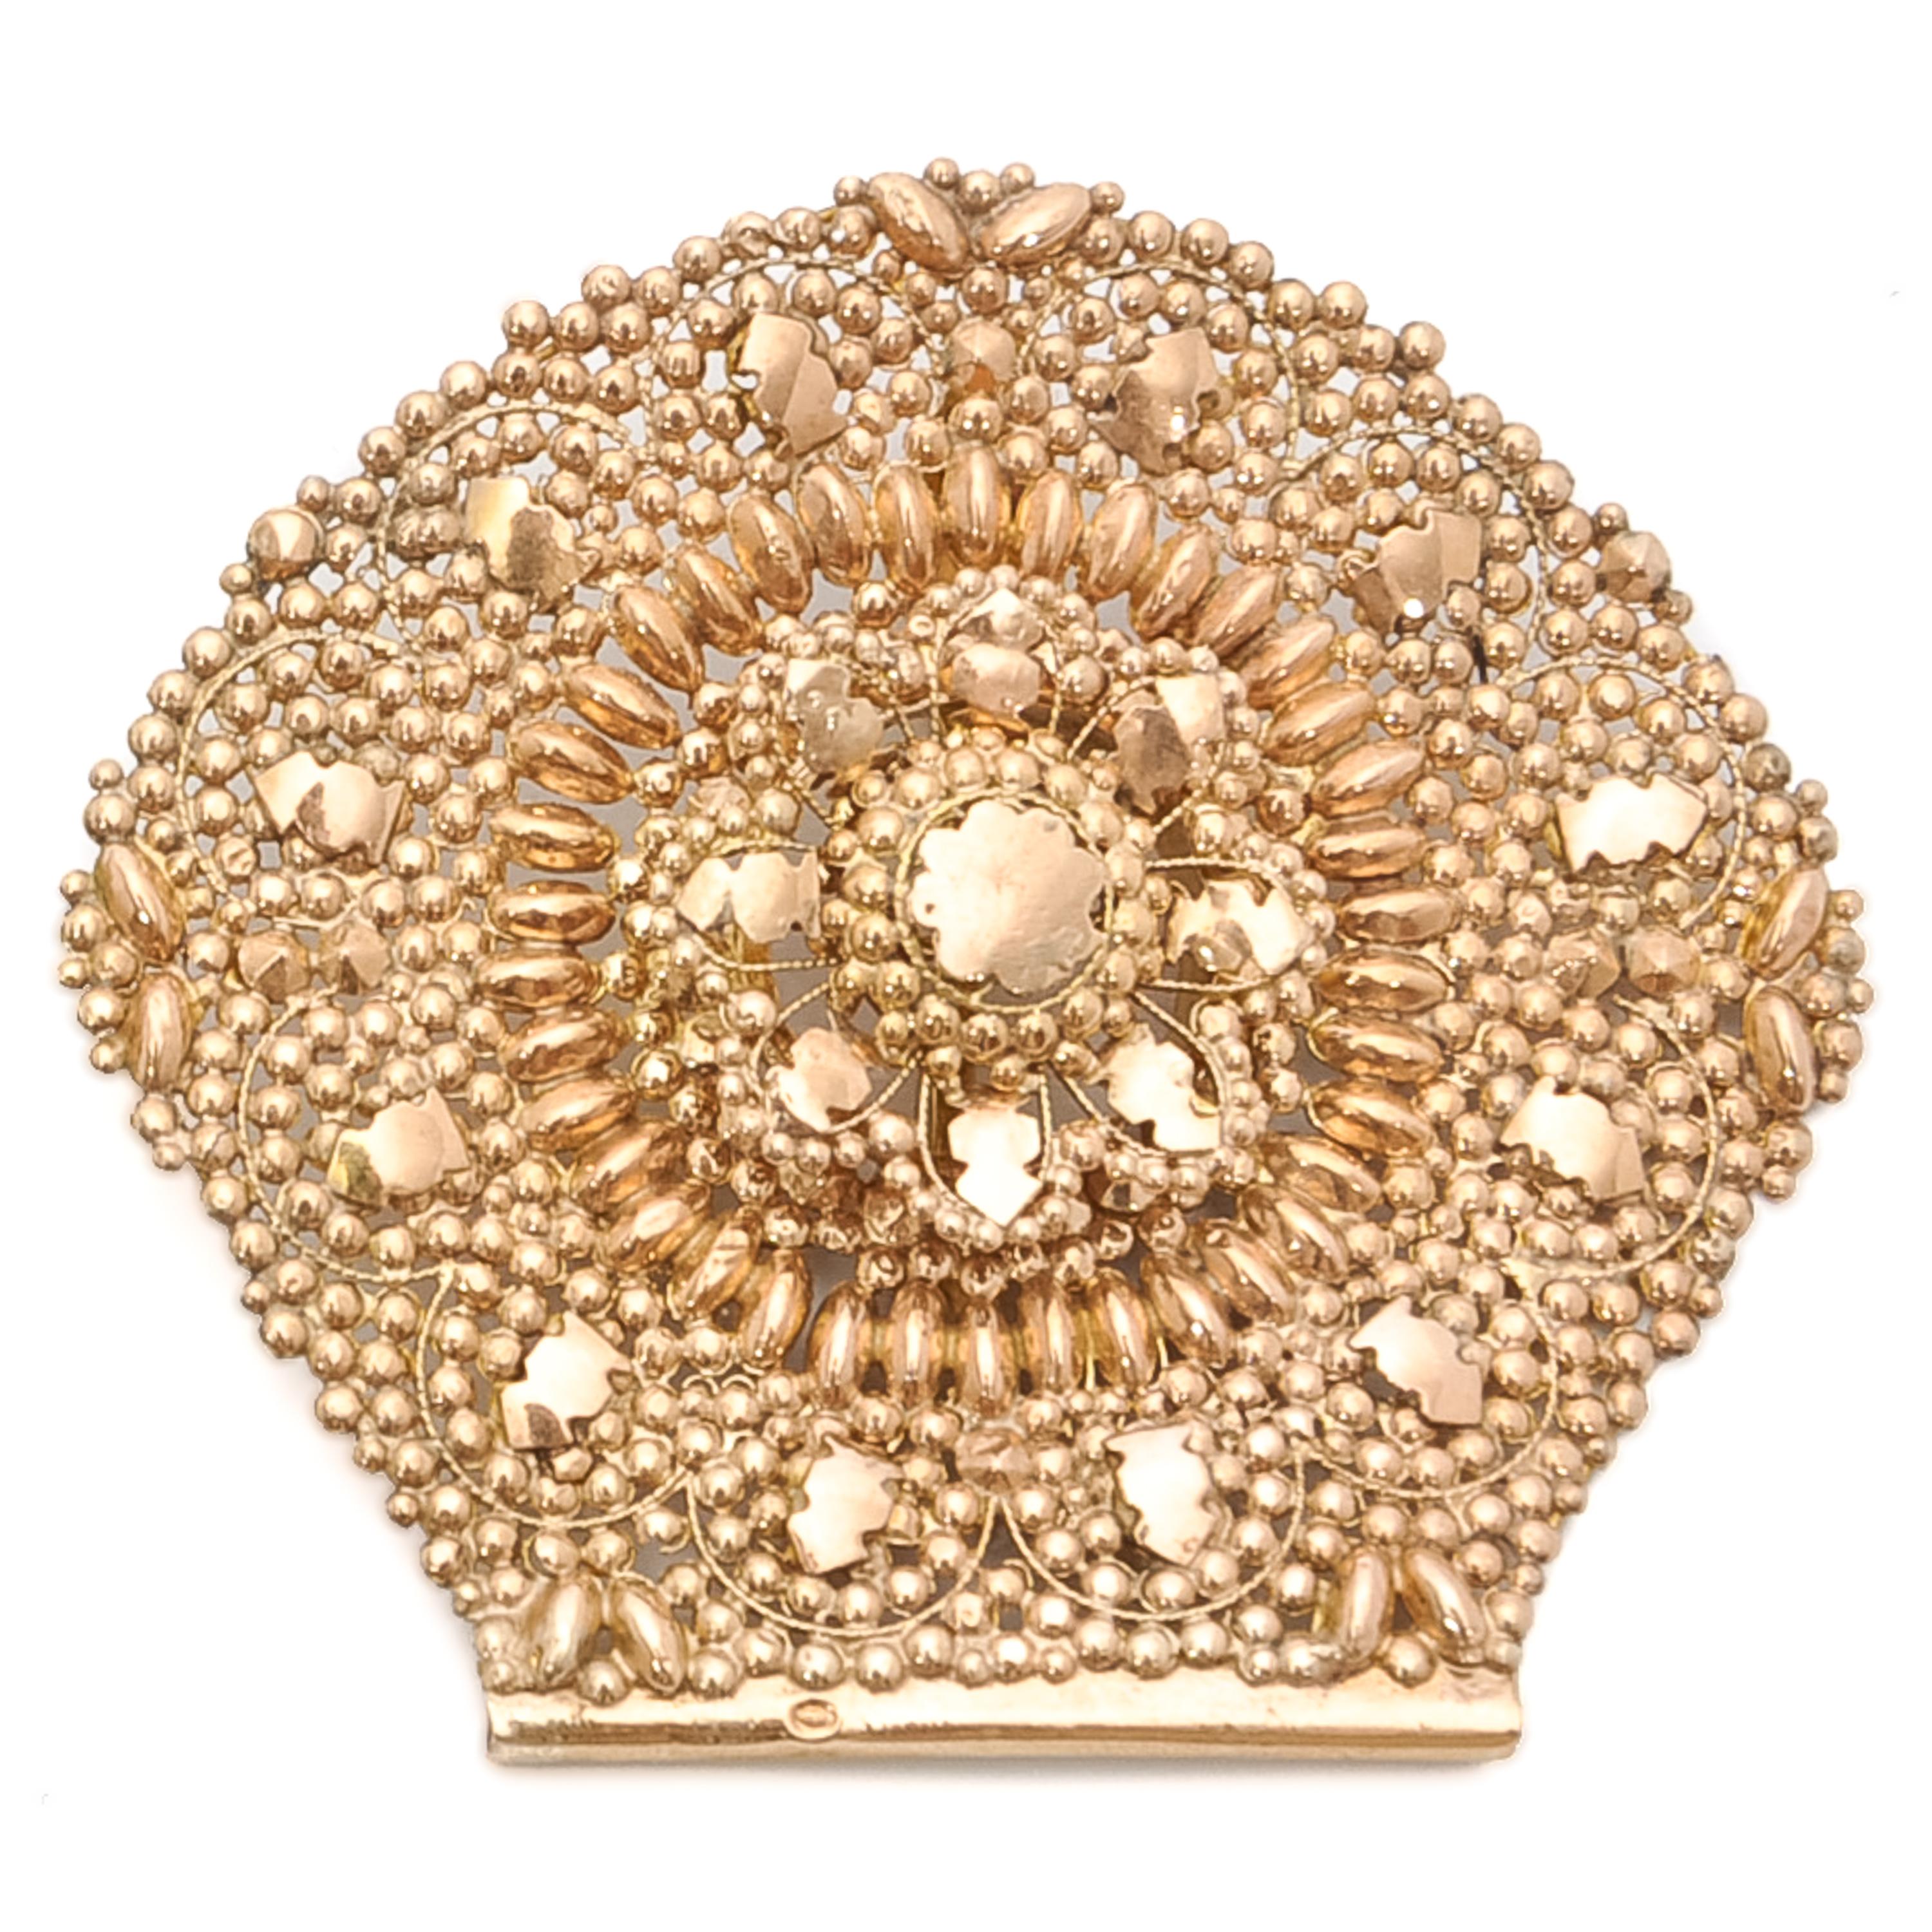 These antique 19th century 14 karat gold jewels are created with granulation and cannetille. The design of these antique pieces consists of many tiny balls (granules) which are applied on the whole surface, stamped with gold convex motifs. The